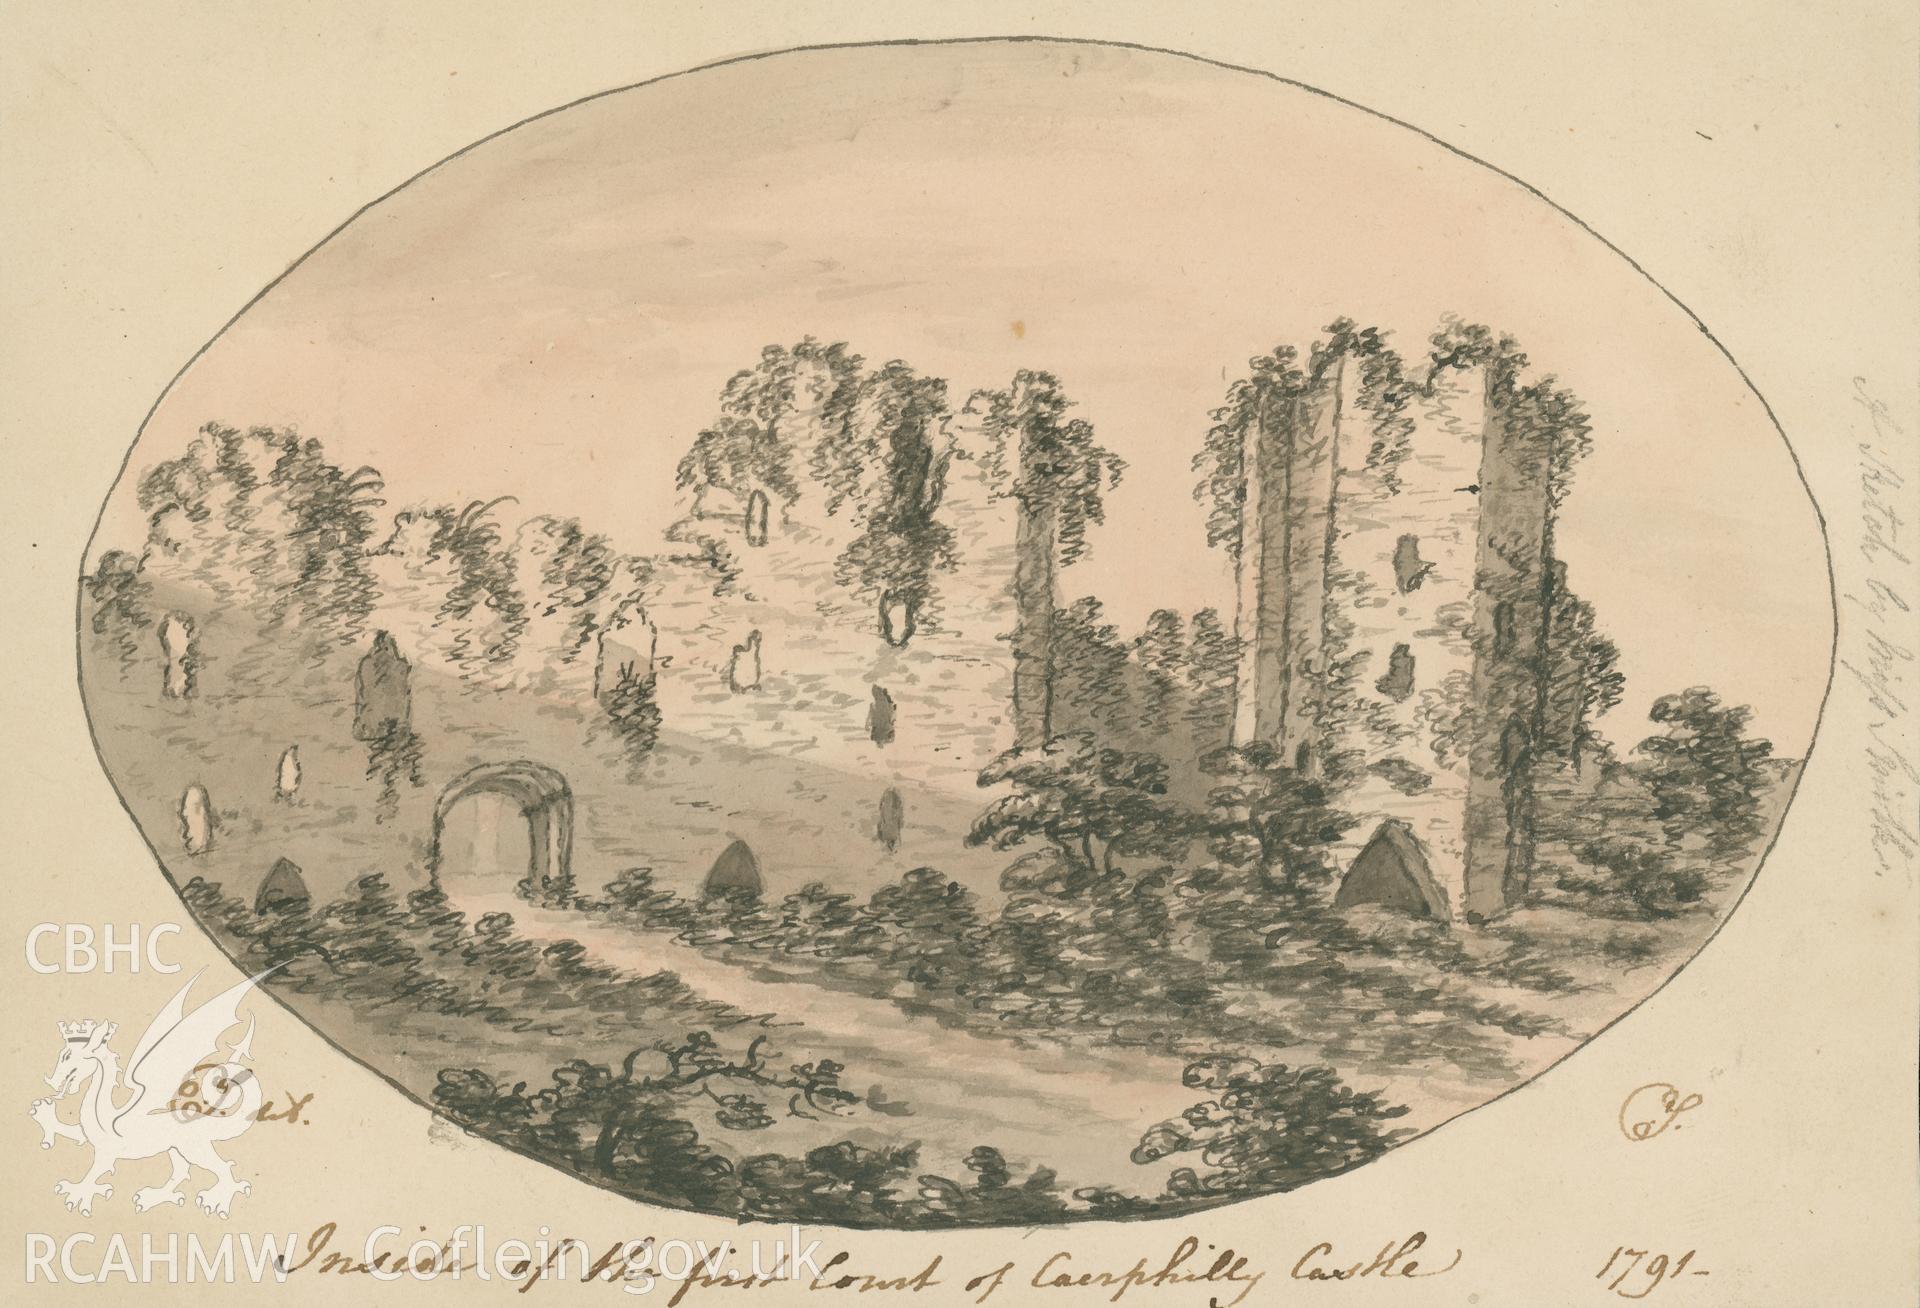 Digital copy of a sketch by Miss Smith entitled "Inside the first court of Caerphilly Castle " dated 1791